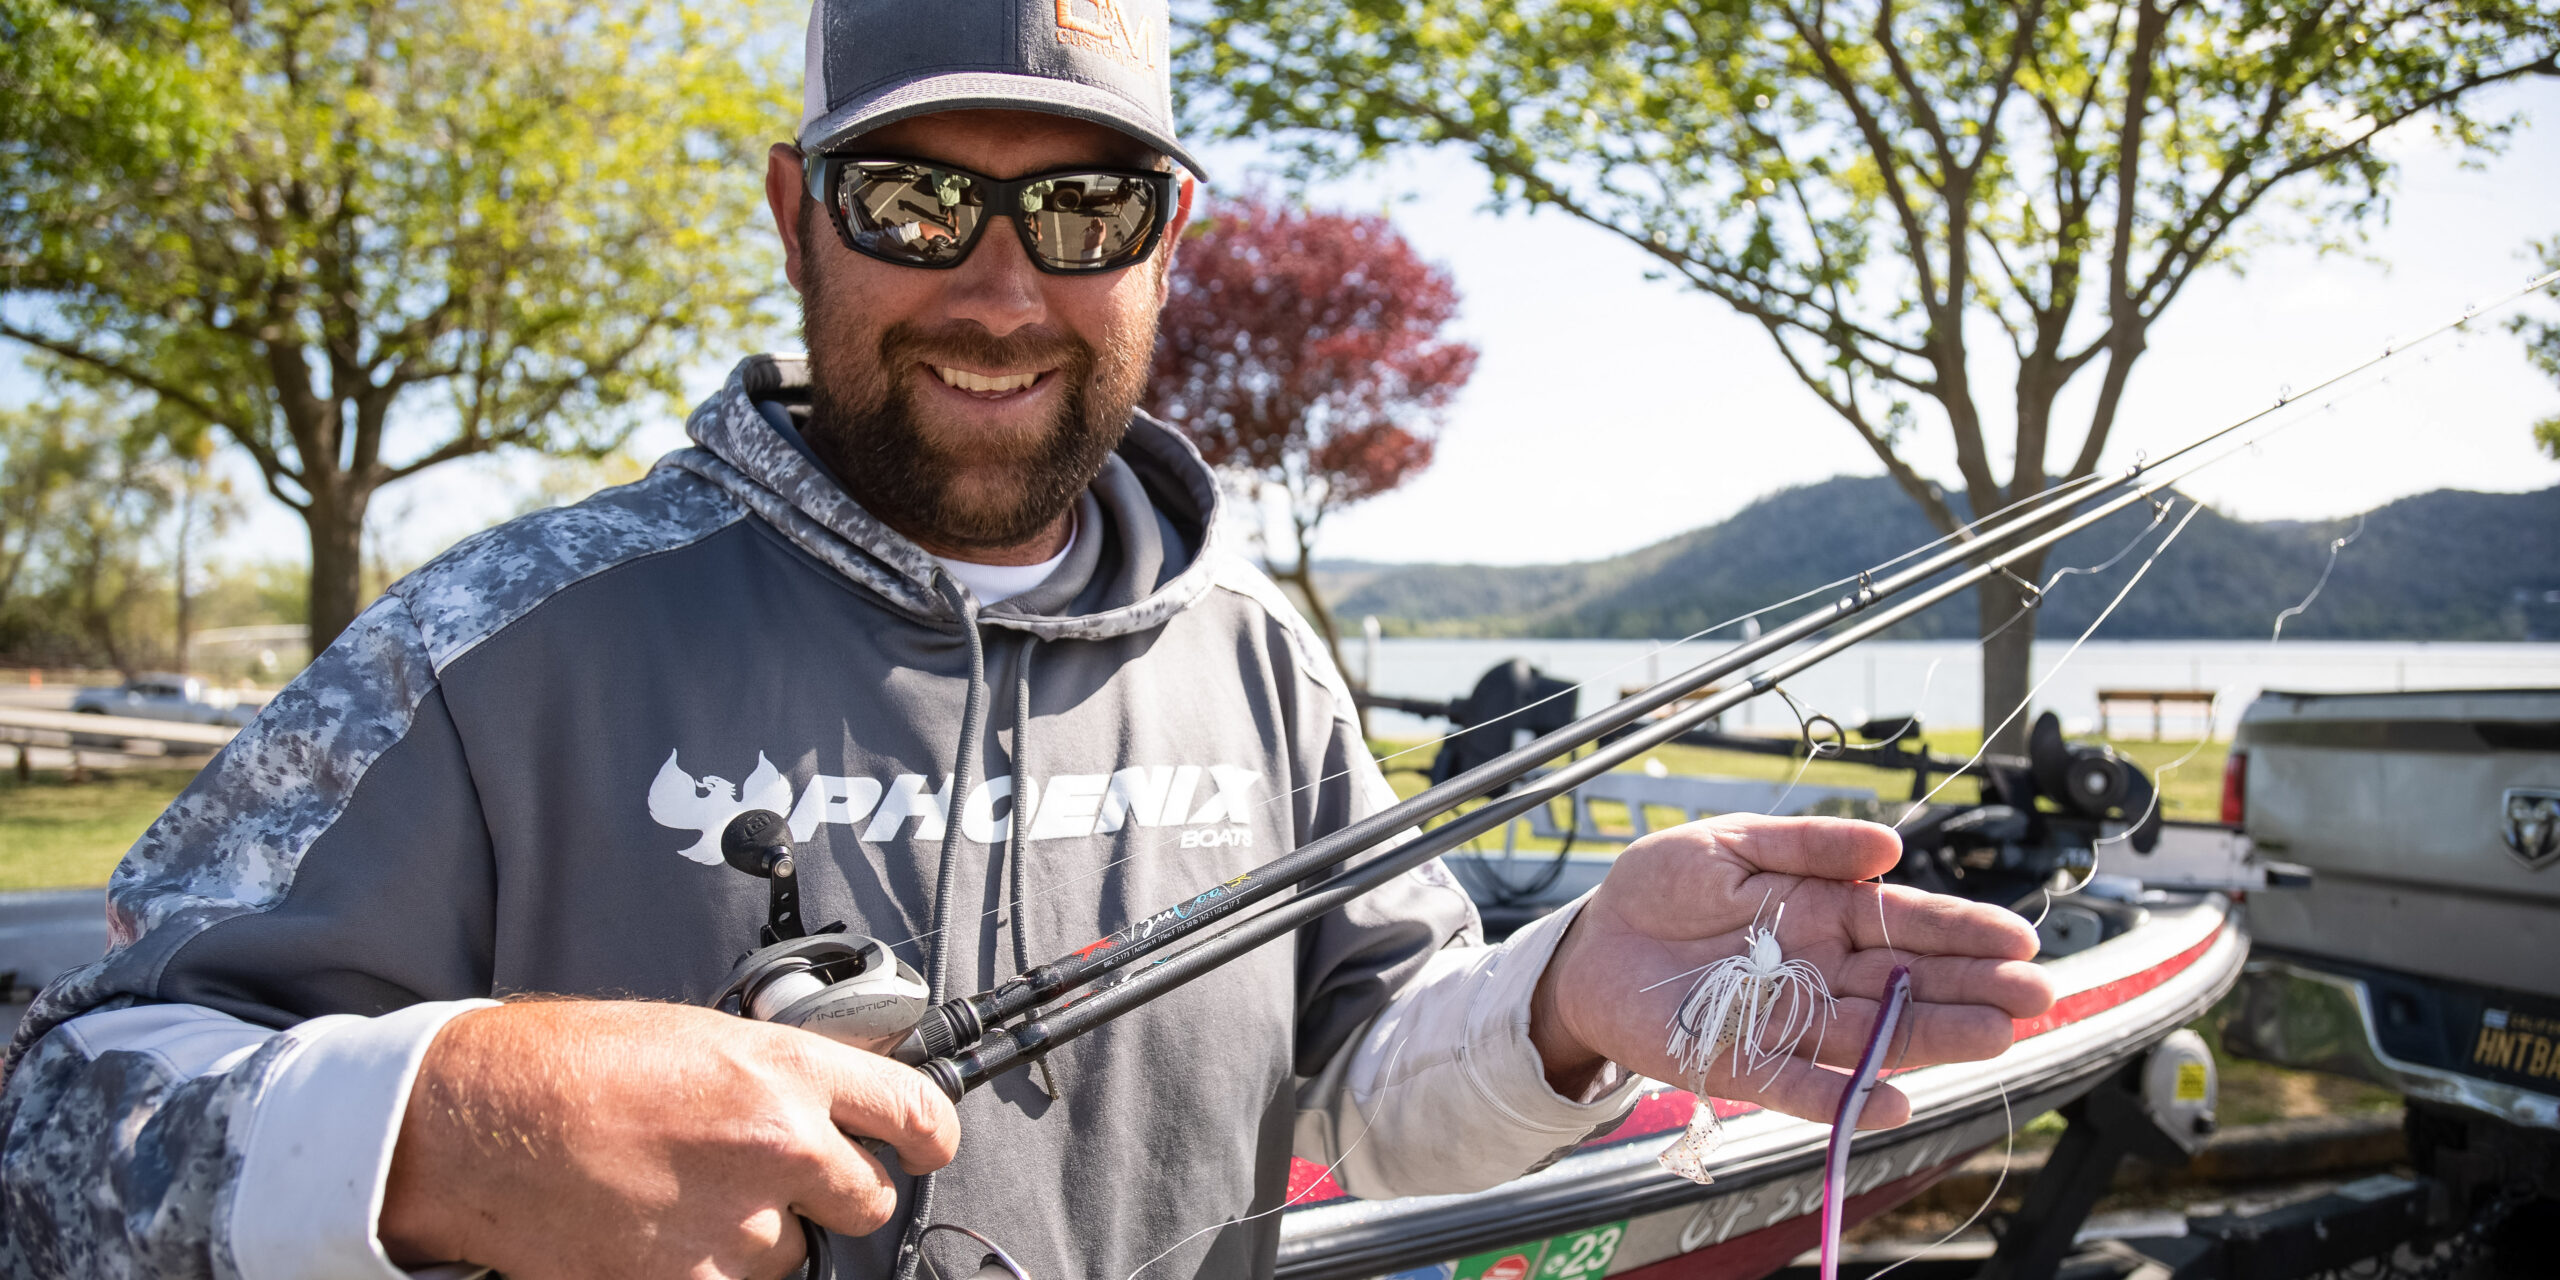 Shimano North America Fishing on Instagram: There's a big bait